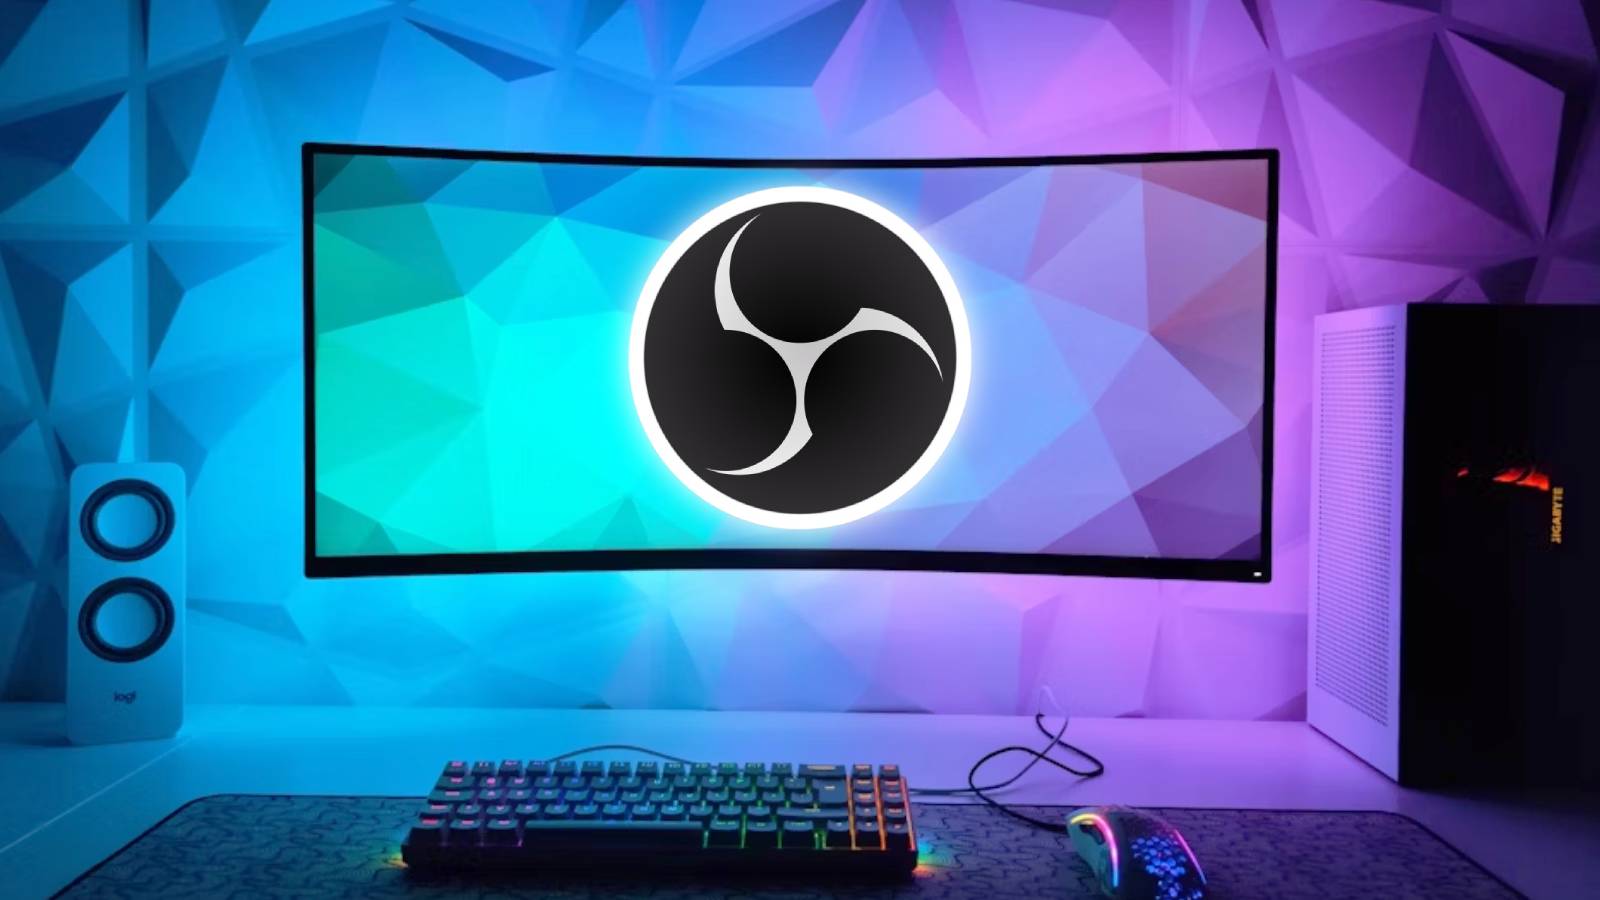 Image of a gaming PC taken from Unsplash, feauturing the OBS logo on the screen.